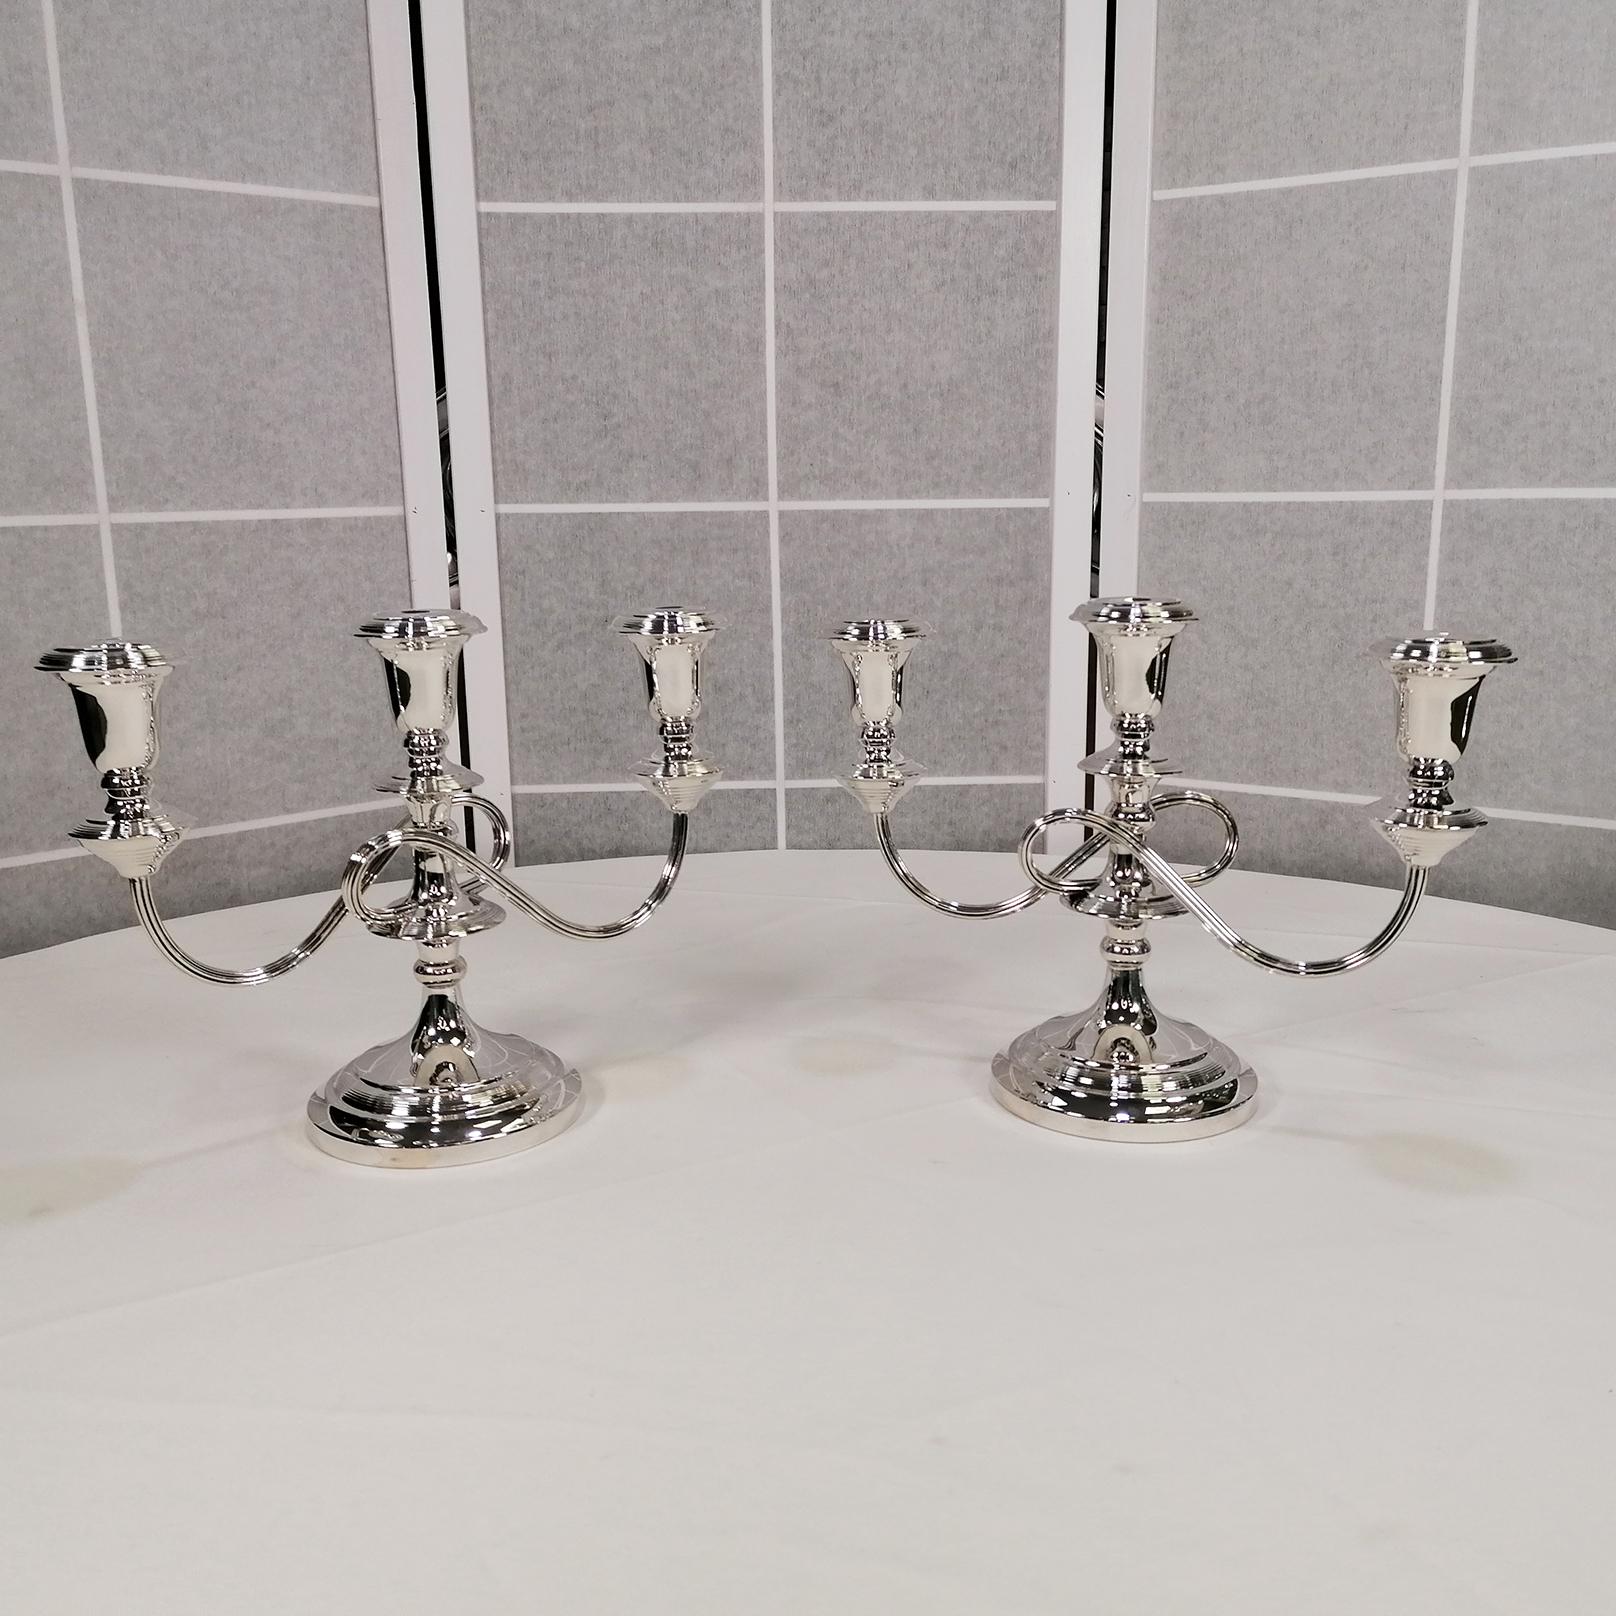 20th Century Italian solid Silver Pr. of Candelabras For Sale 8